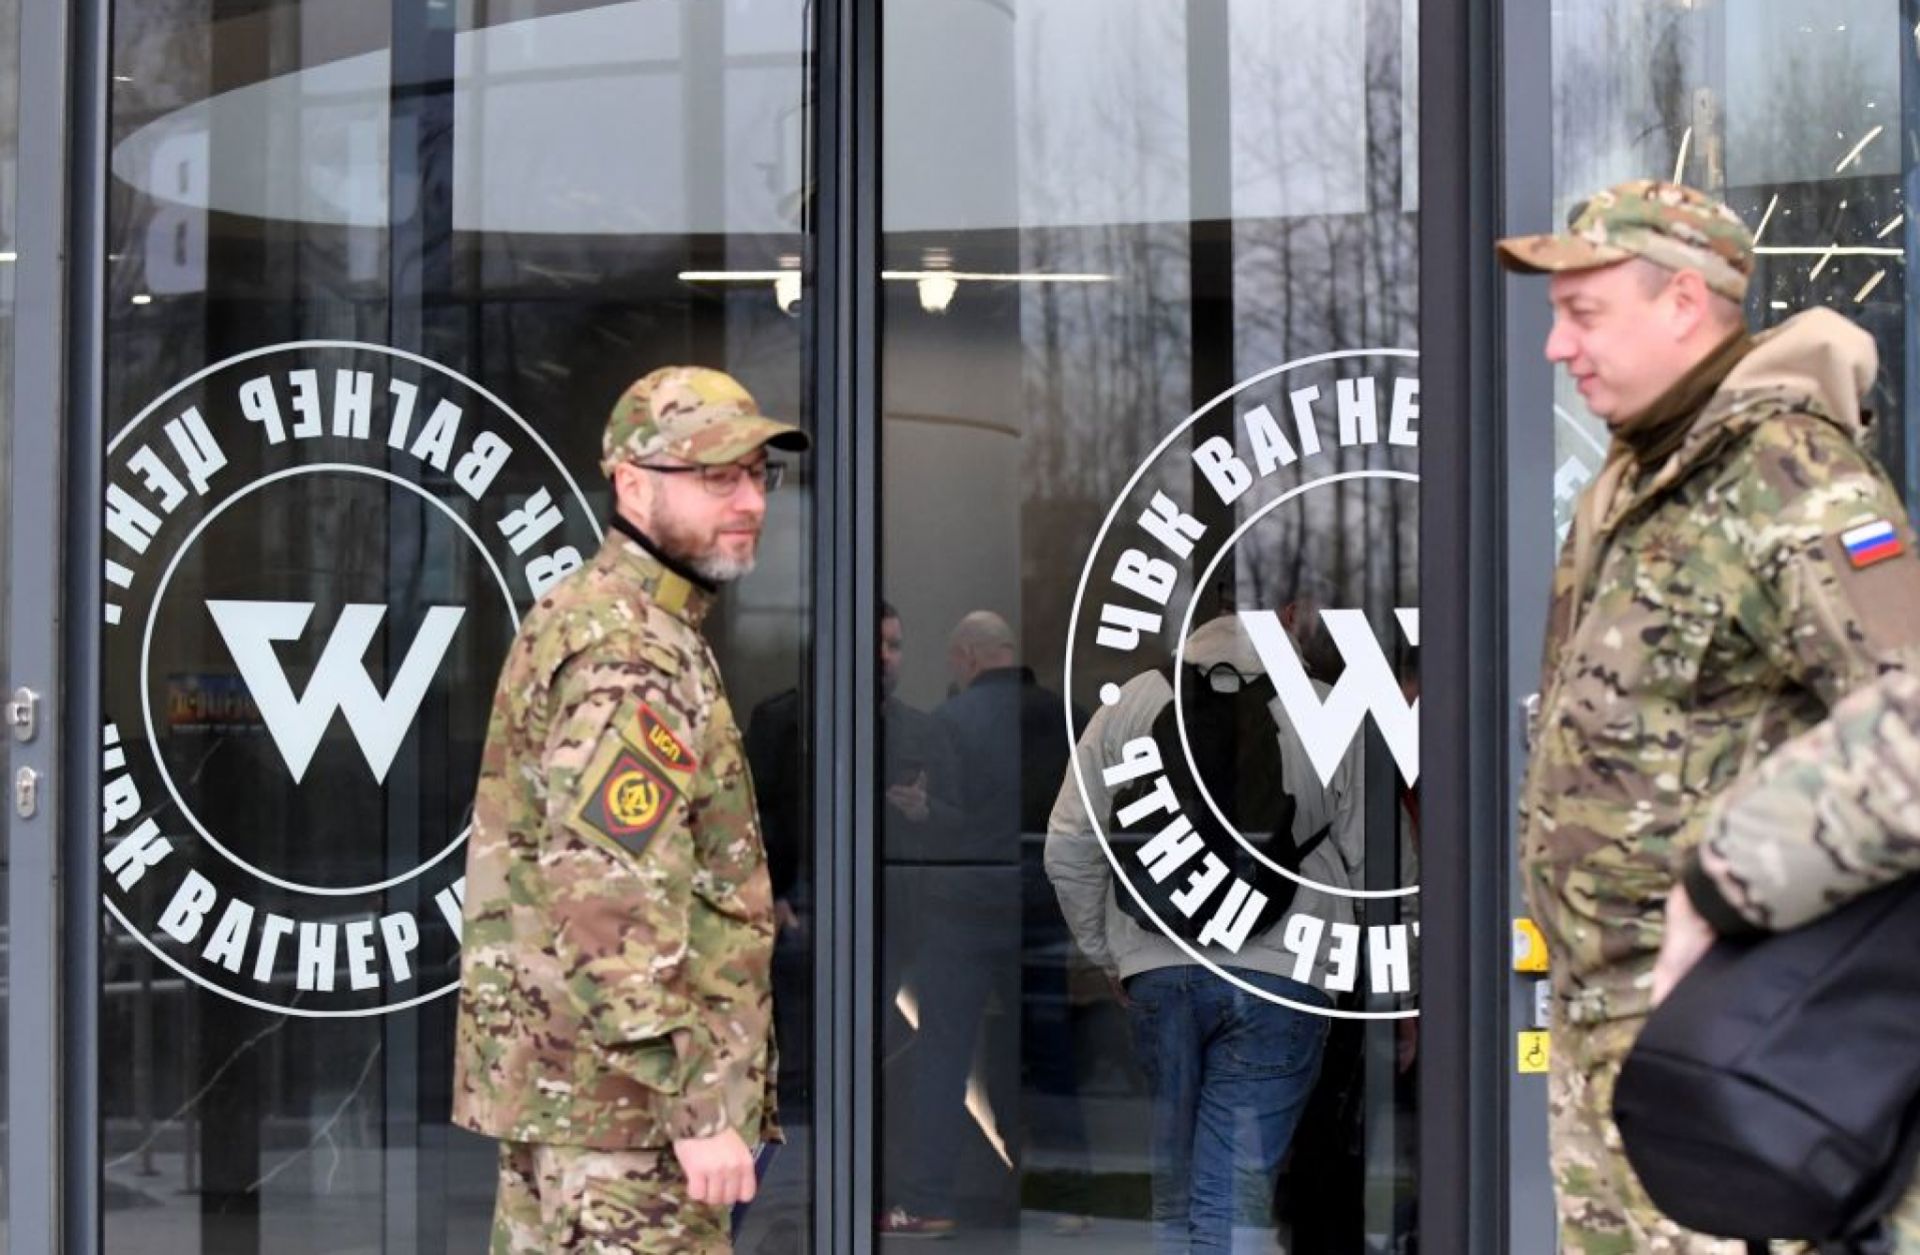 Visitors wearing military camouflage stand at the entrance of the ''PMC Wagner Center,'' which is associated with the founder of the Wagner private military group (PMC), Yevgeny Prigozhin, in Saint Petersburg, Russia, on Nov. 4, 2022.